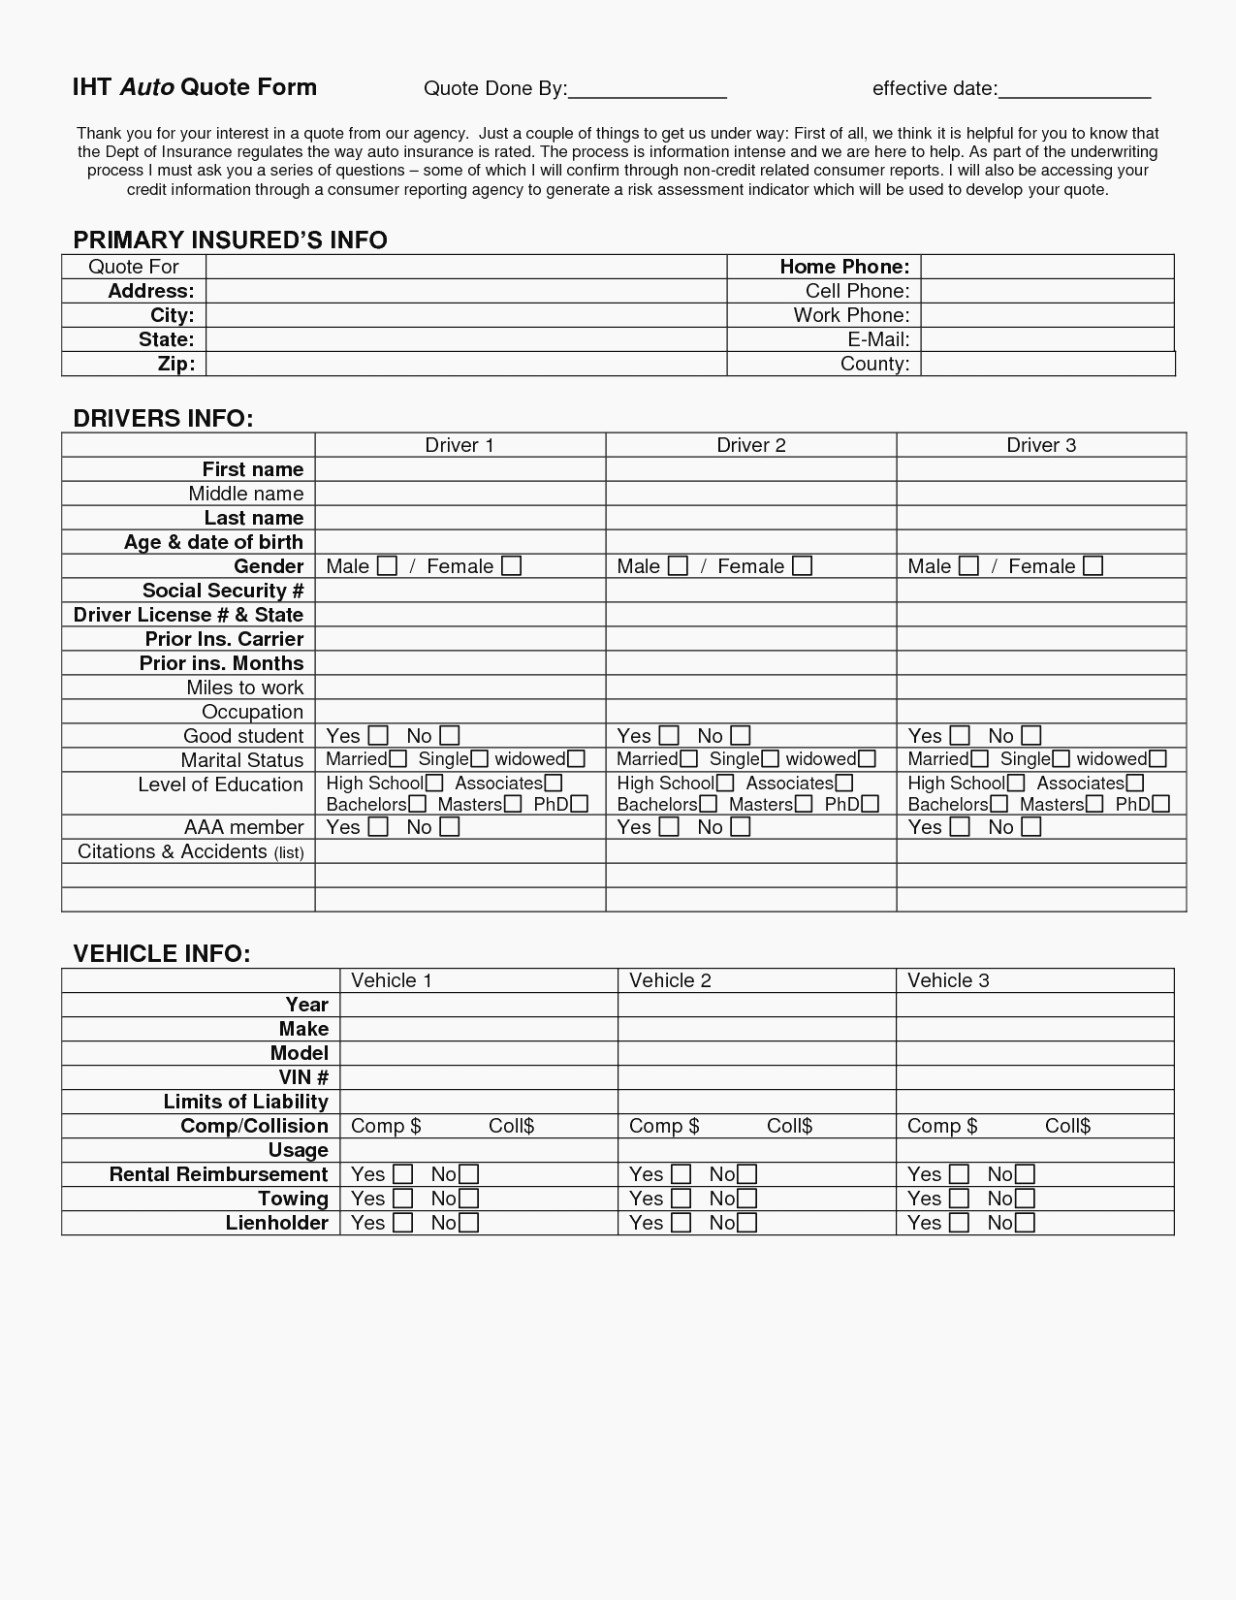 Auto Insurance Quote Sheet Template Best Of What You Should Wear to Homeowners Quote